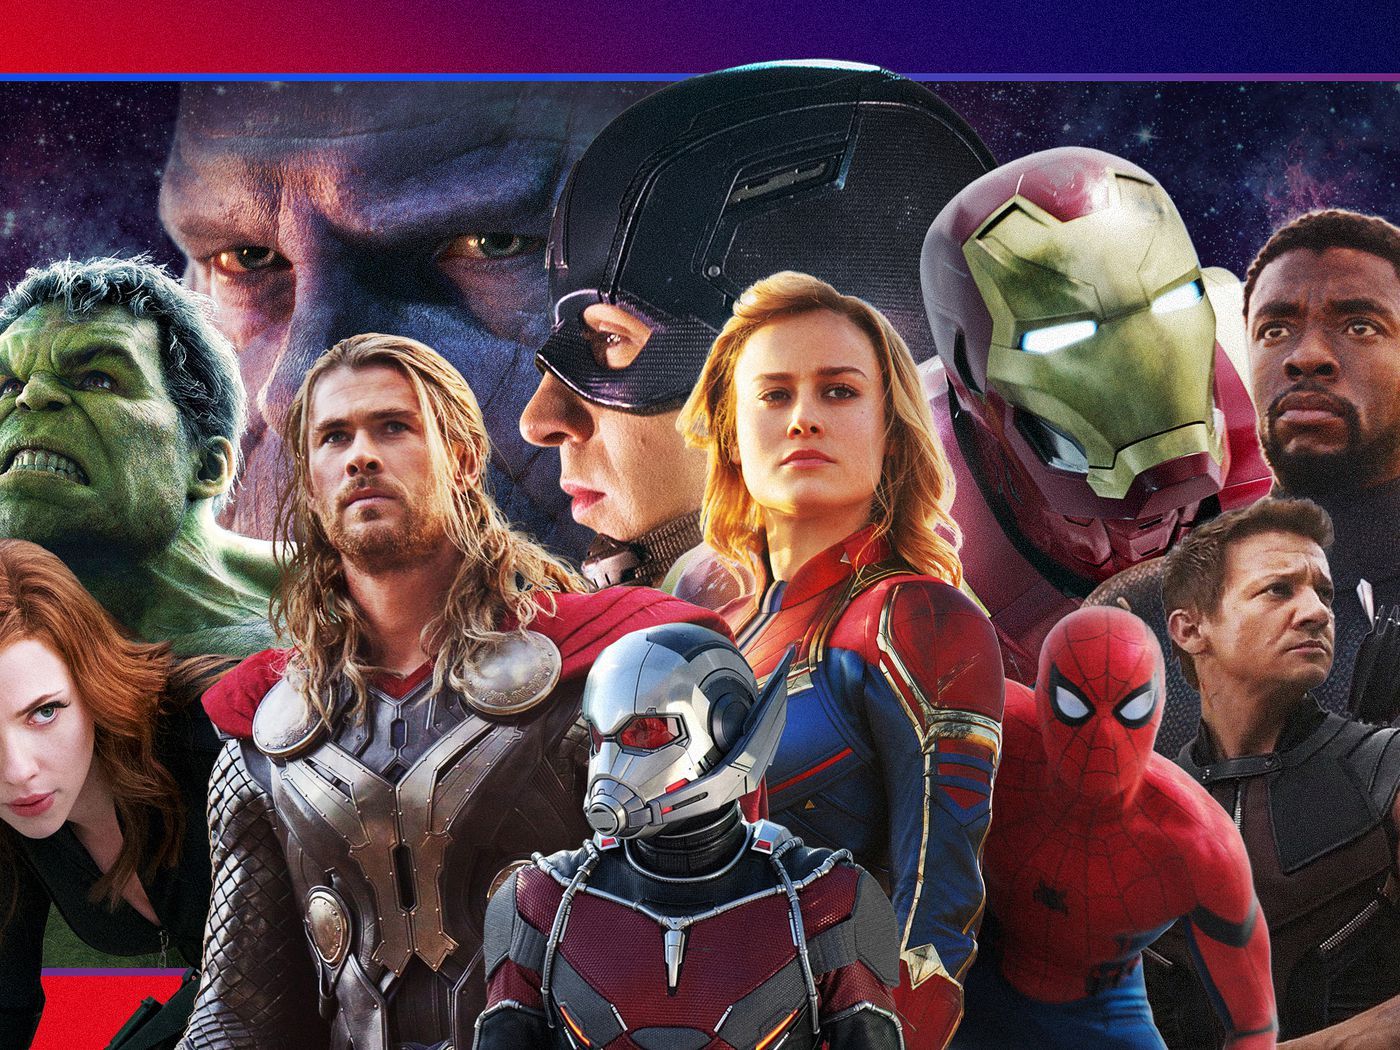 How to watch the Marvel movies in the correct order to maximize thrills